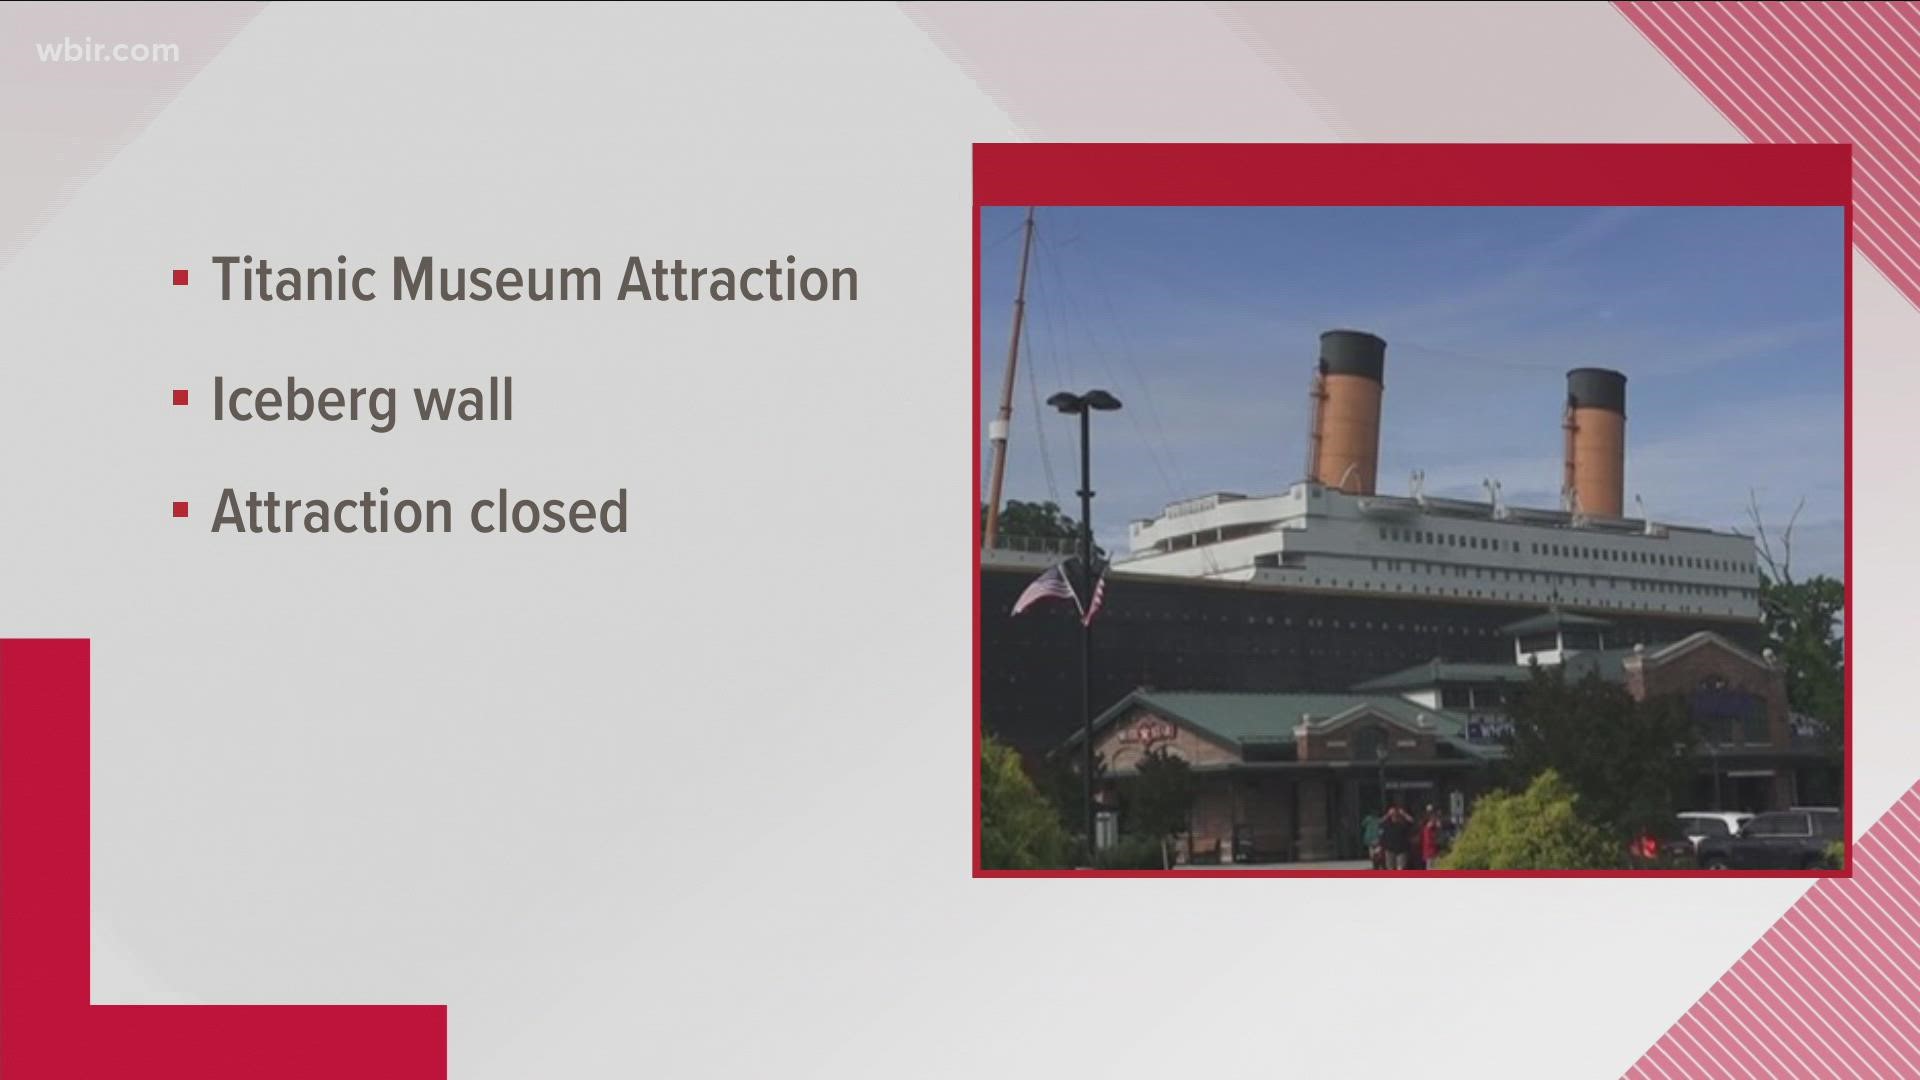 3 injured after 'iceberg' at Titanic museum collapses - National